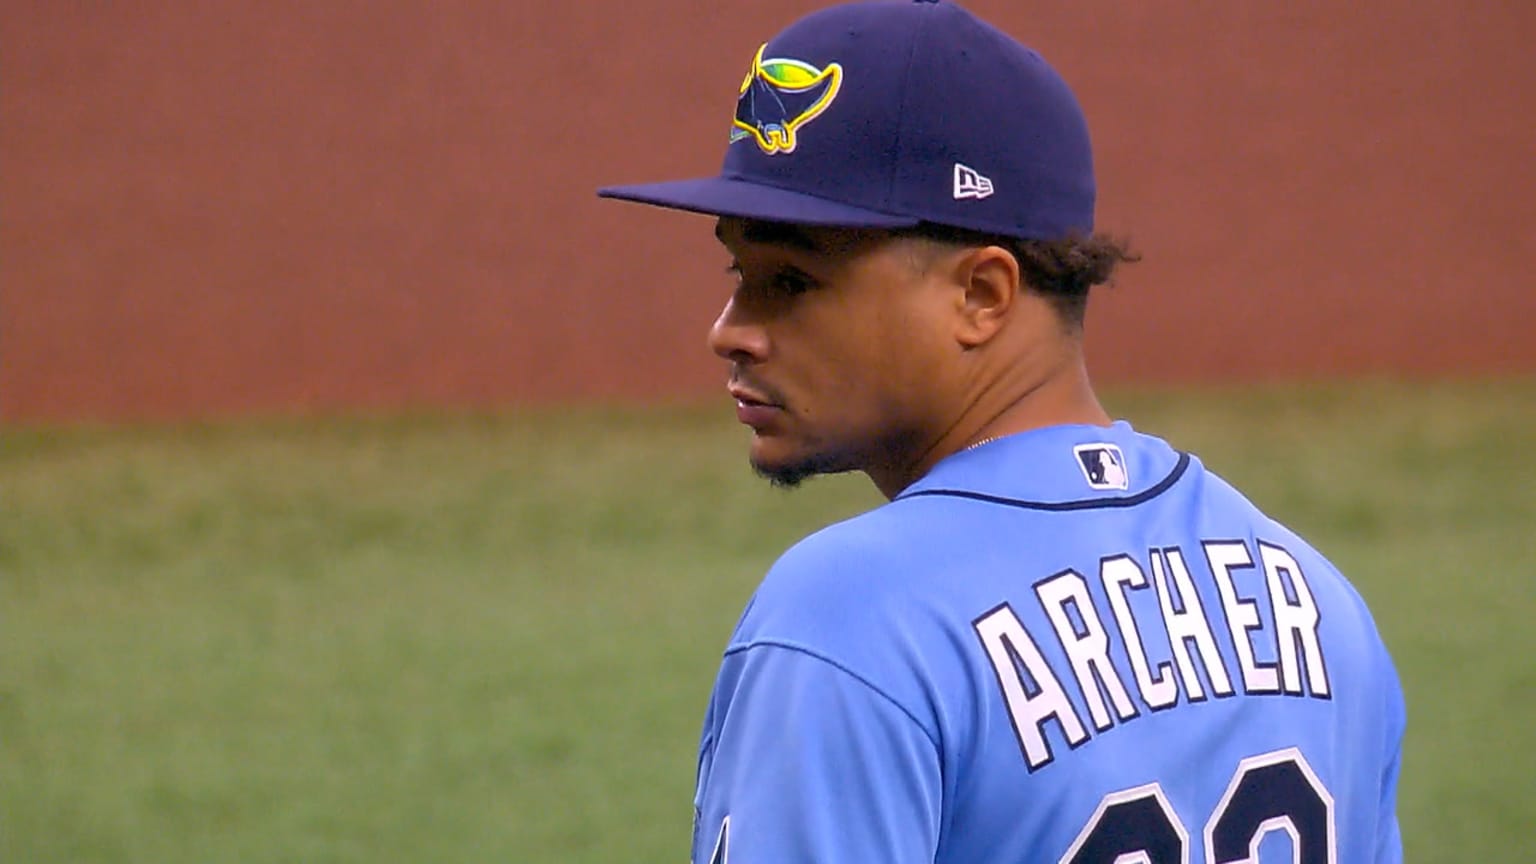 Chris Archer discusses late mom, forearm injury